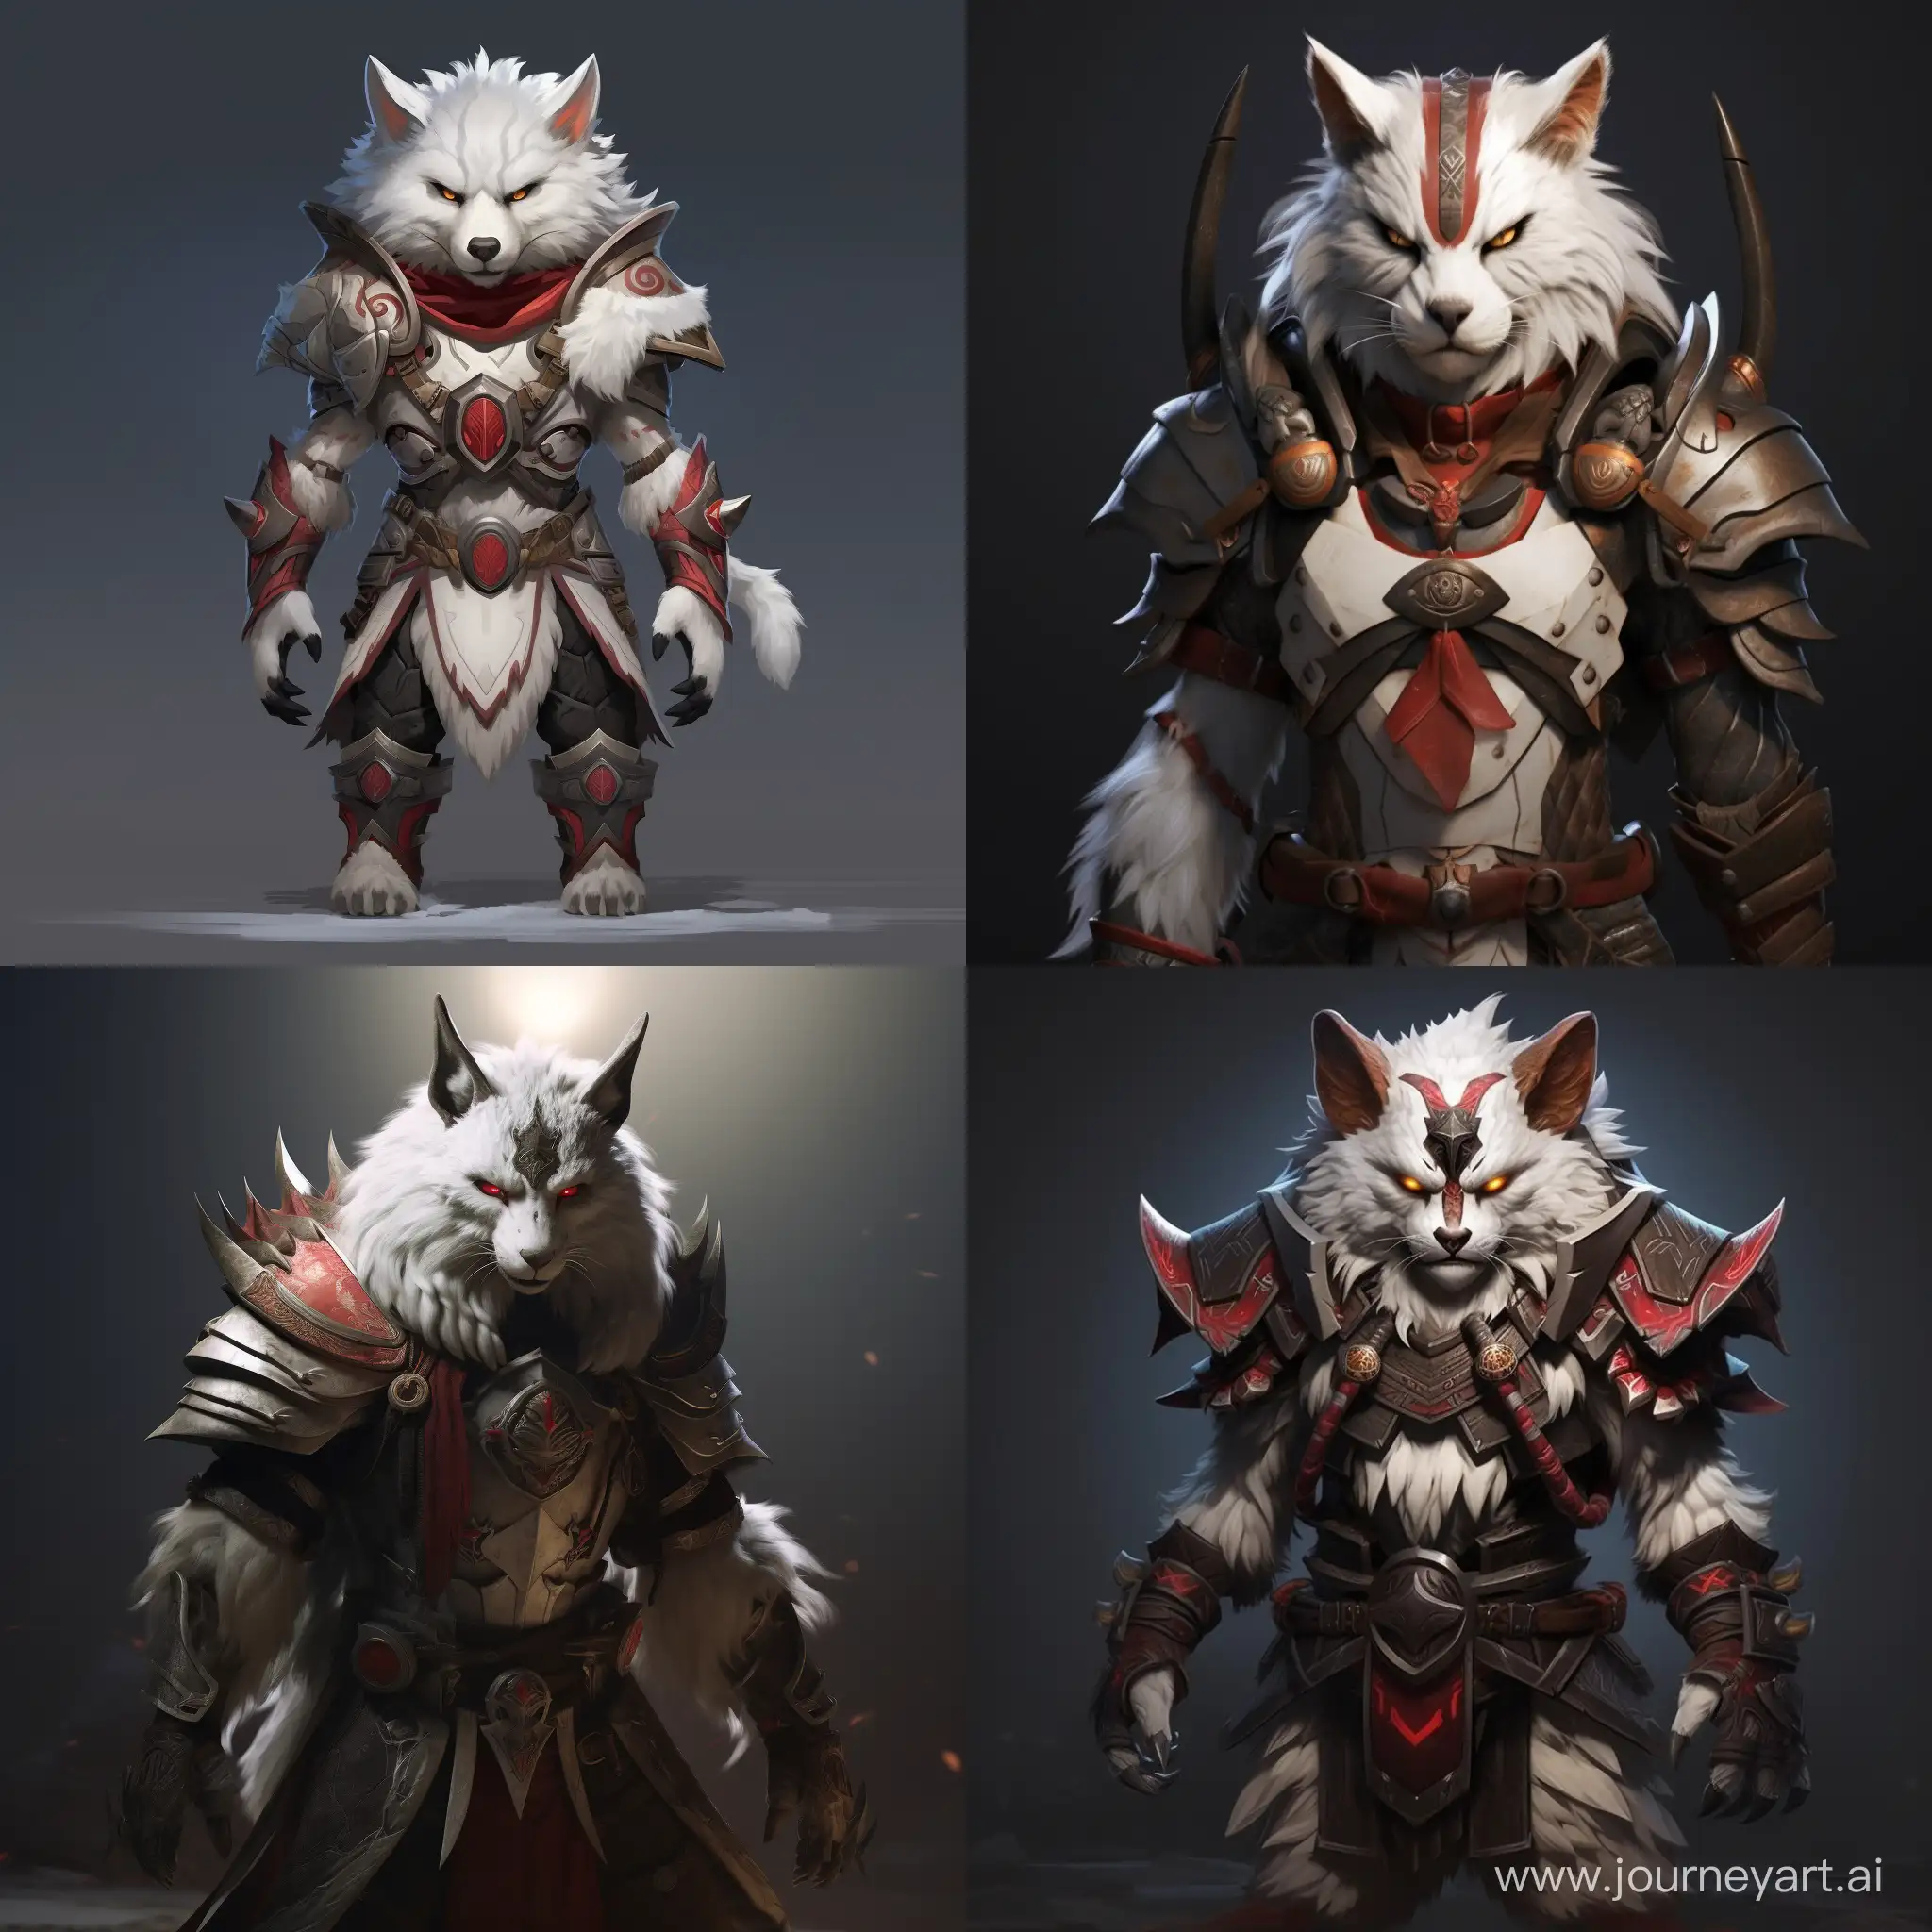 A vulpera from World of Warcraft, white fur and fire-red eyes, light armor, lether shoulders pads with iron inserts. Big, pointy ears and short face.